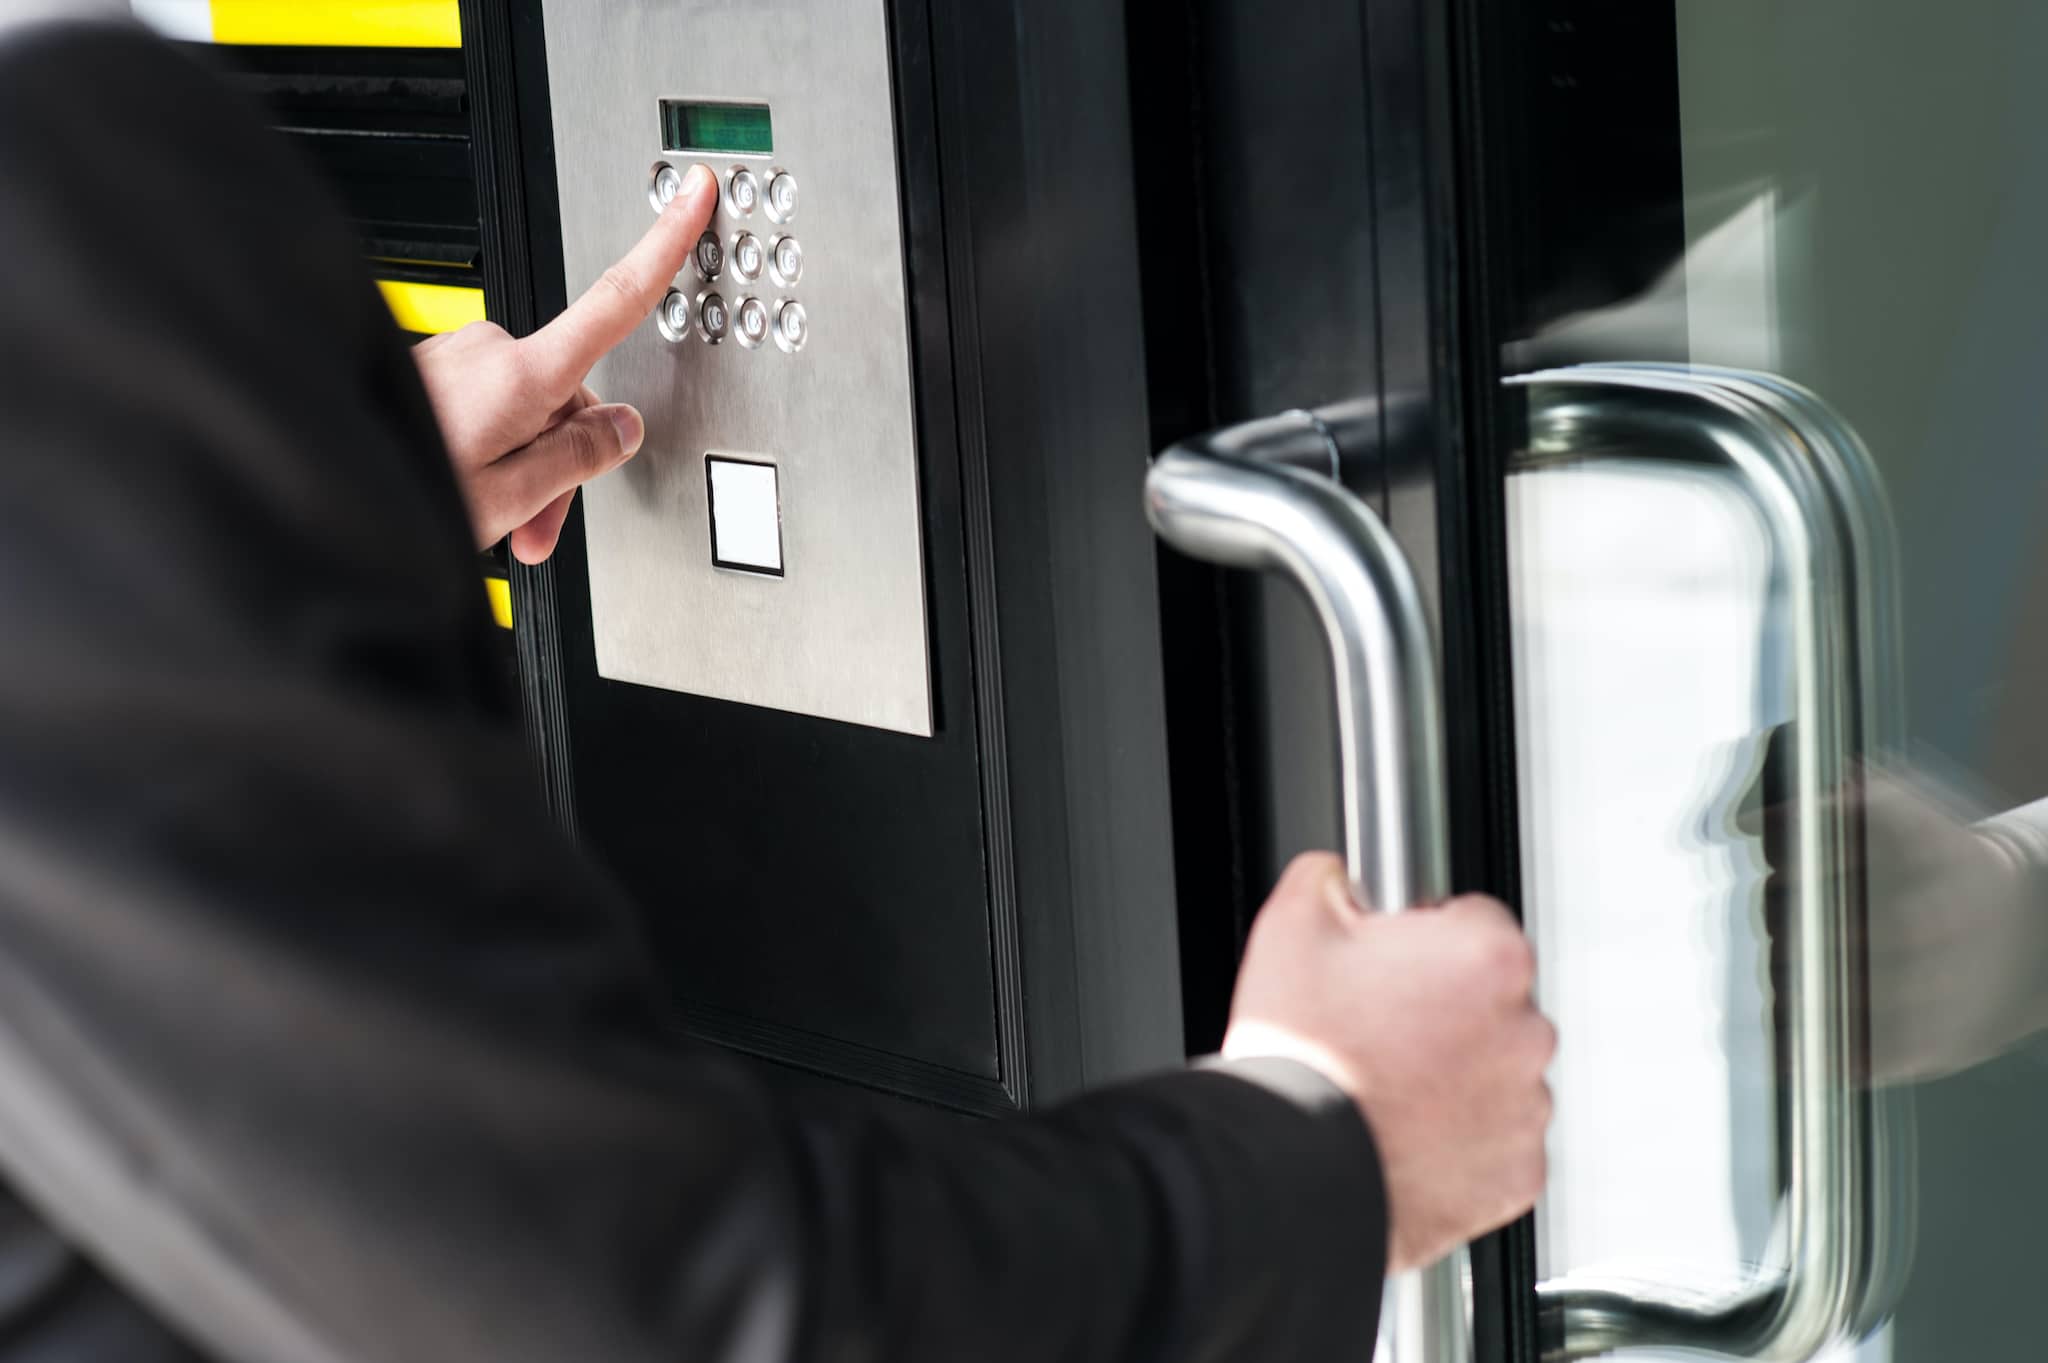 What Is Access Control?